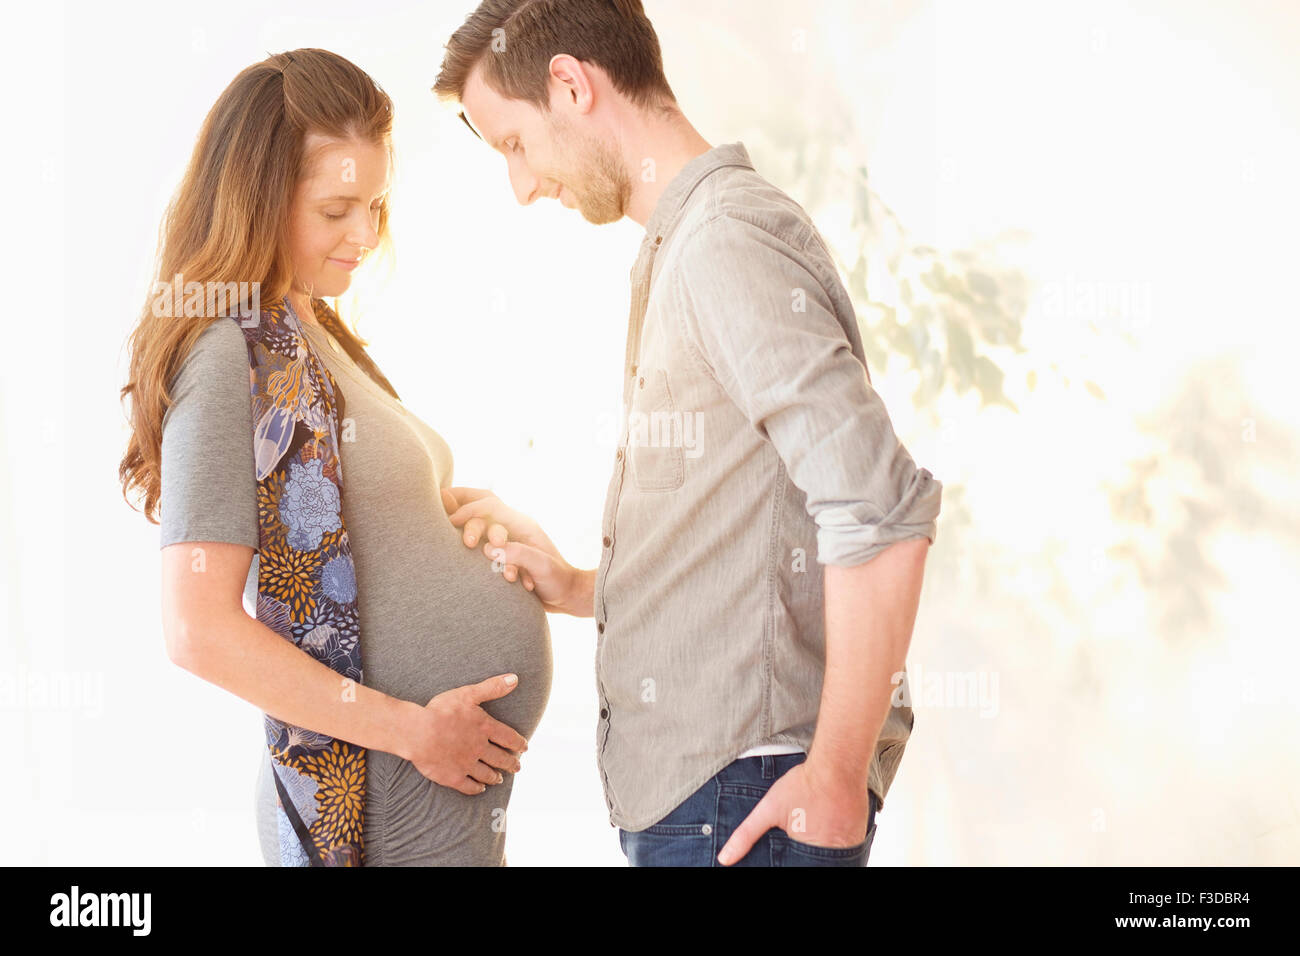 Pregnant woman holding hands with her boyfriend Stock Photo